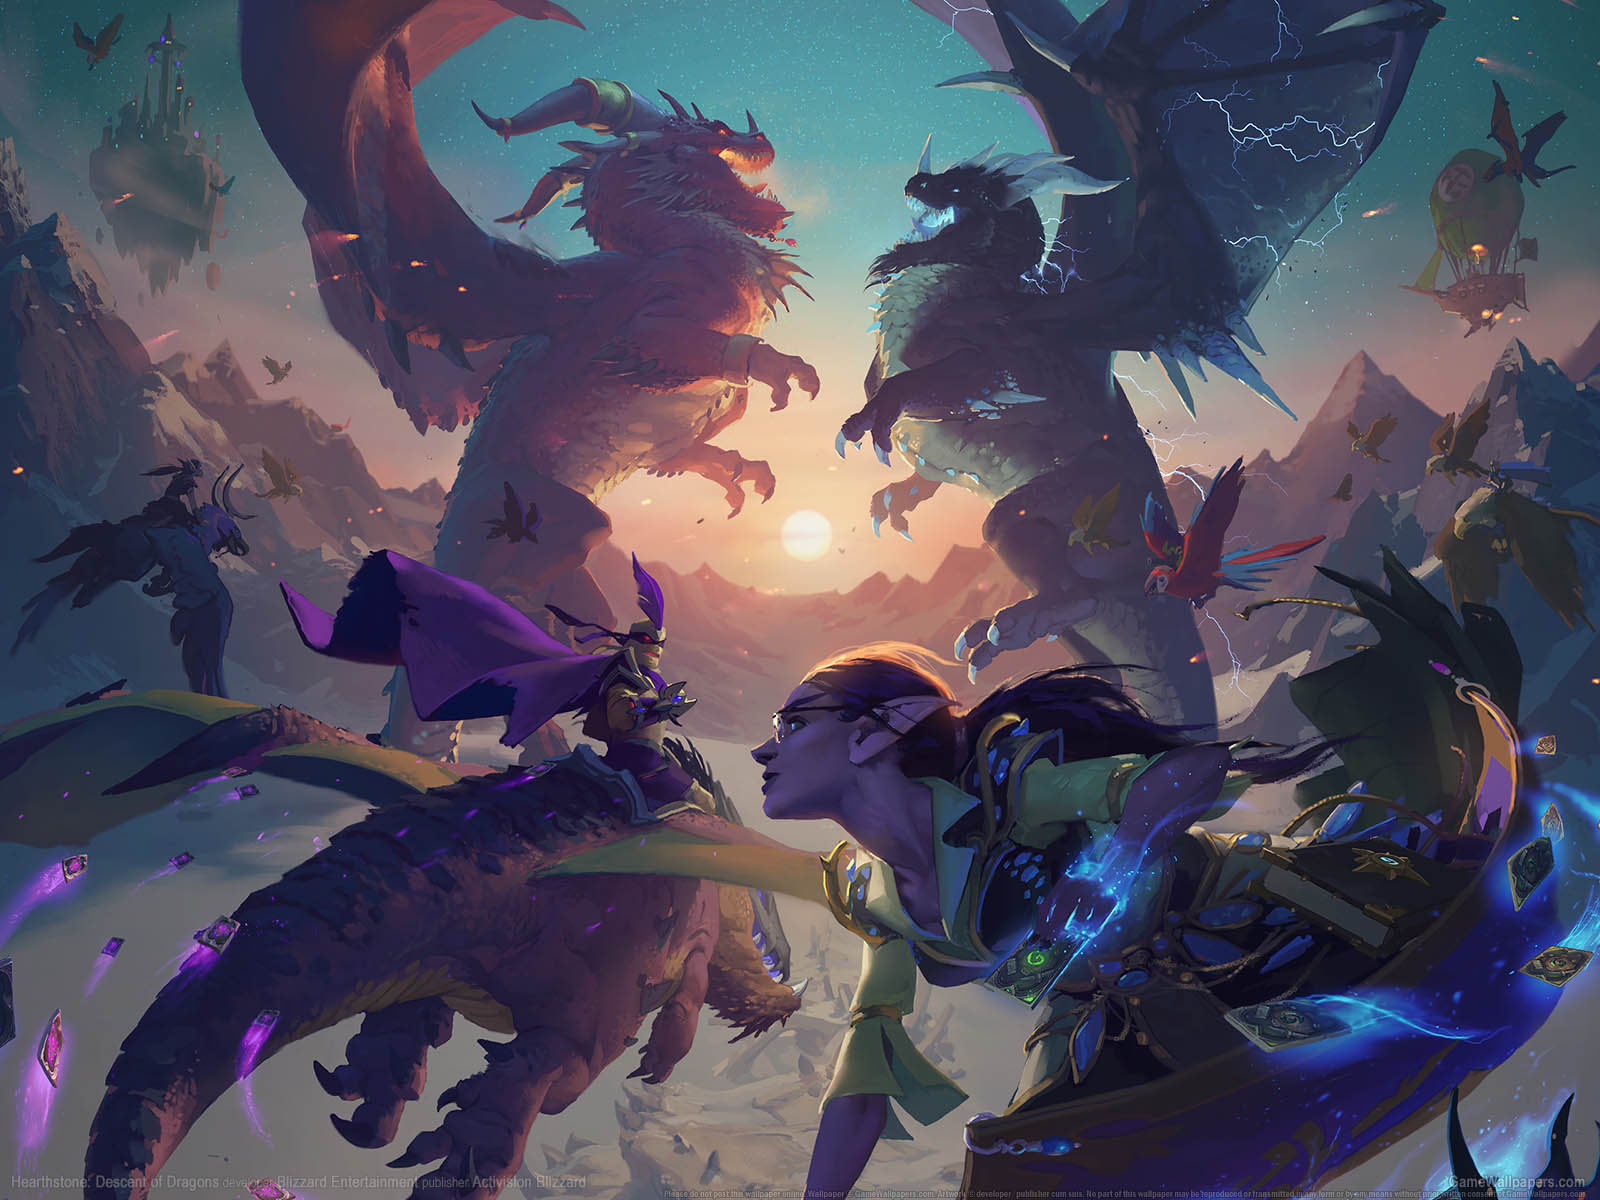 Hearthstone%25253A Descent of Dragons wallpaper 01 1600x1200